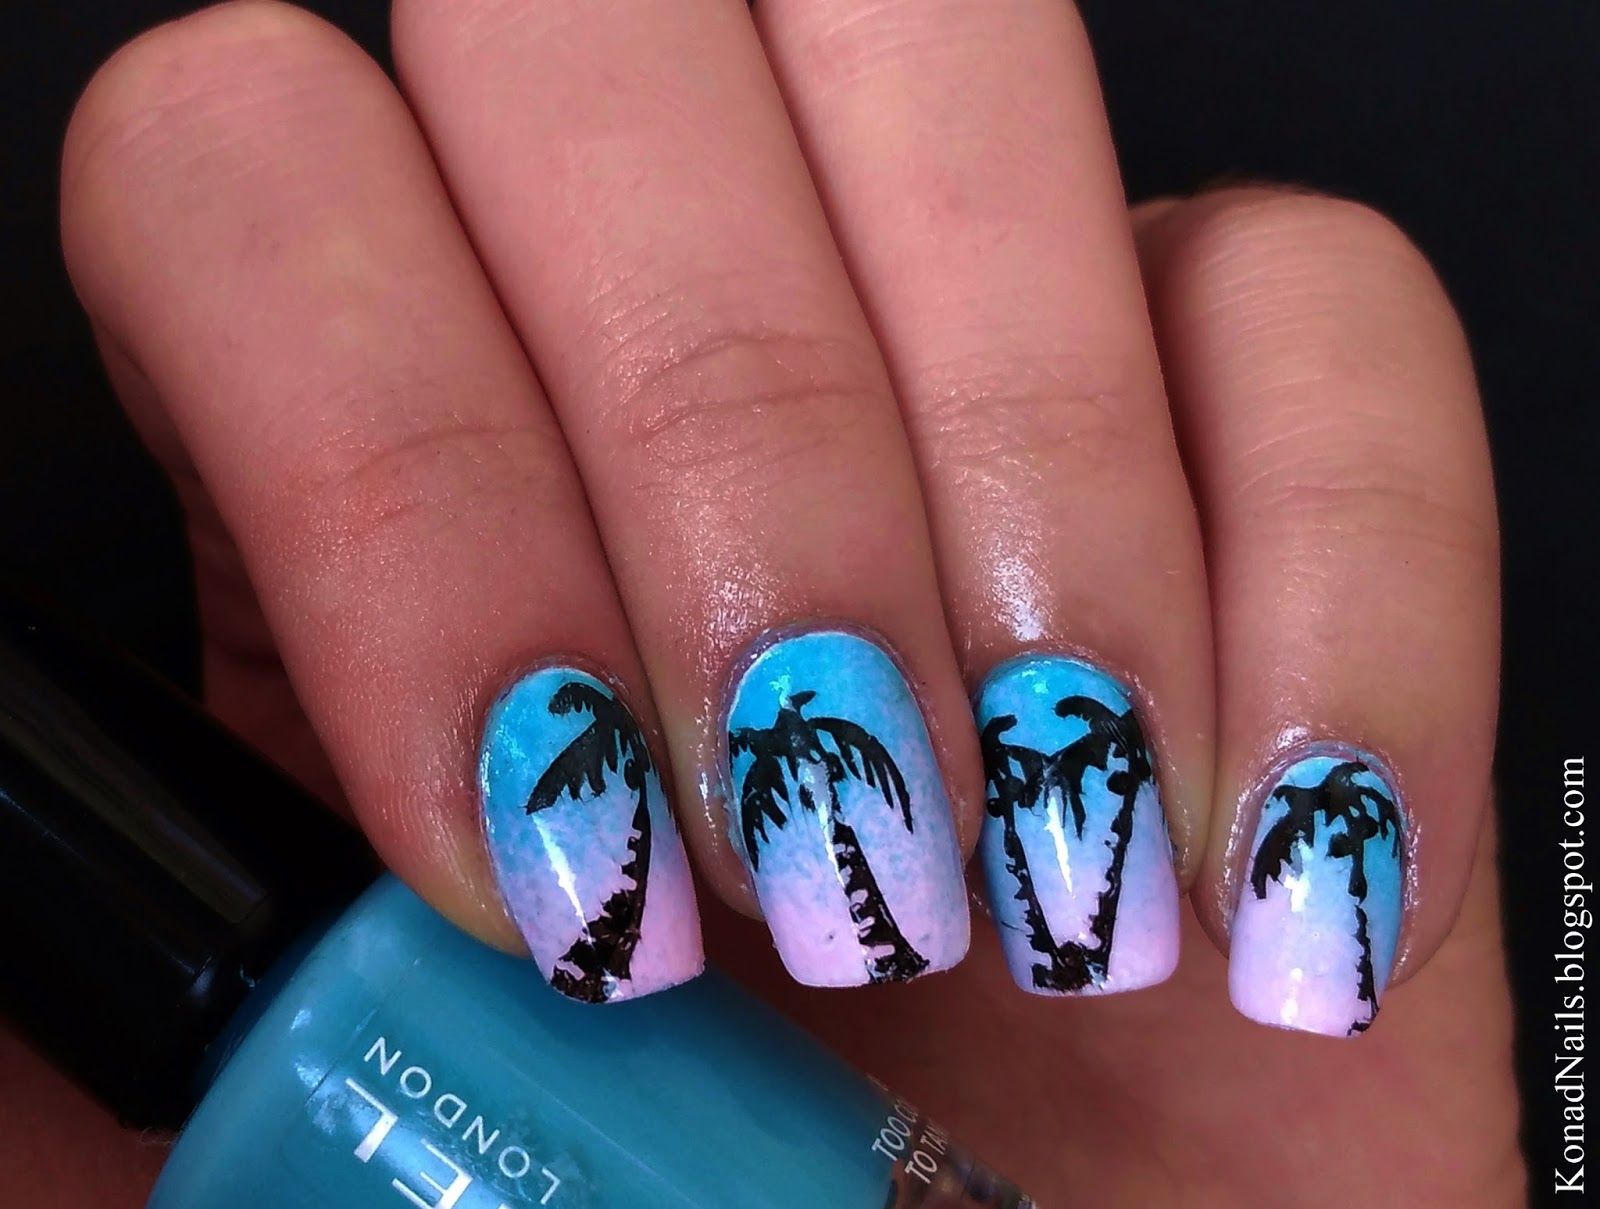 6. "Palm Tree Nail Art for Spring Break" - wide 6